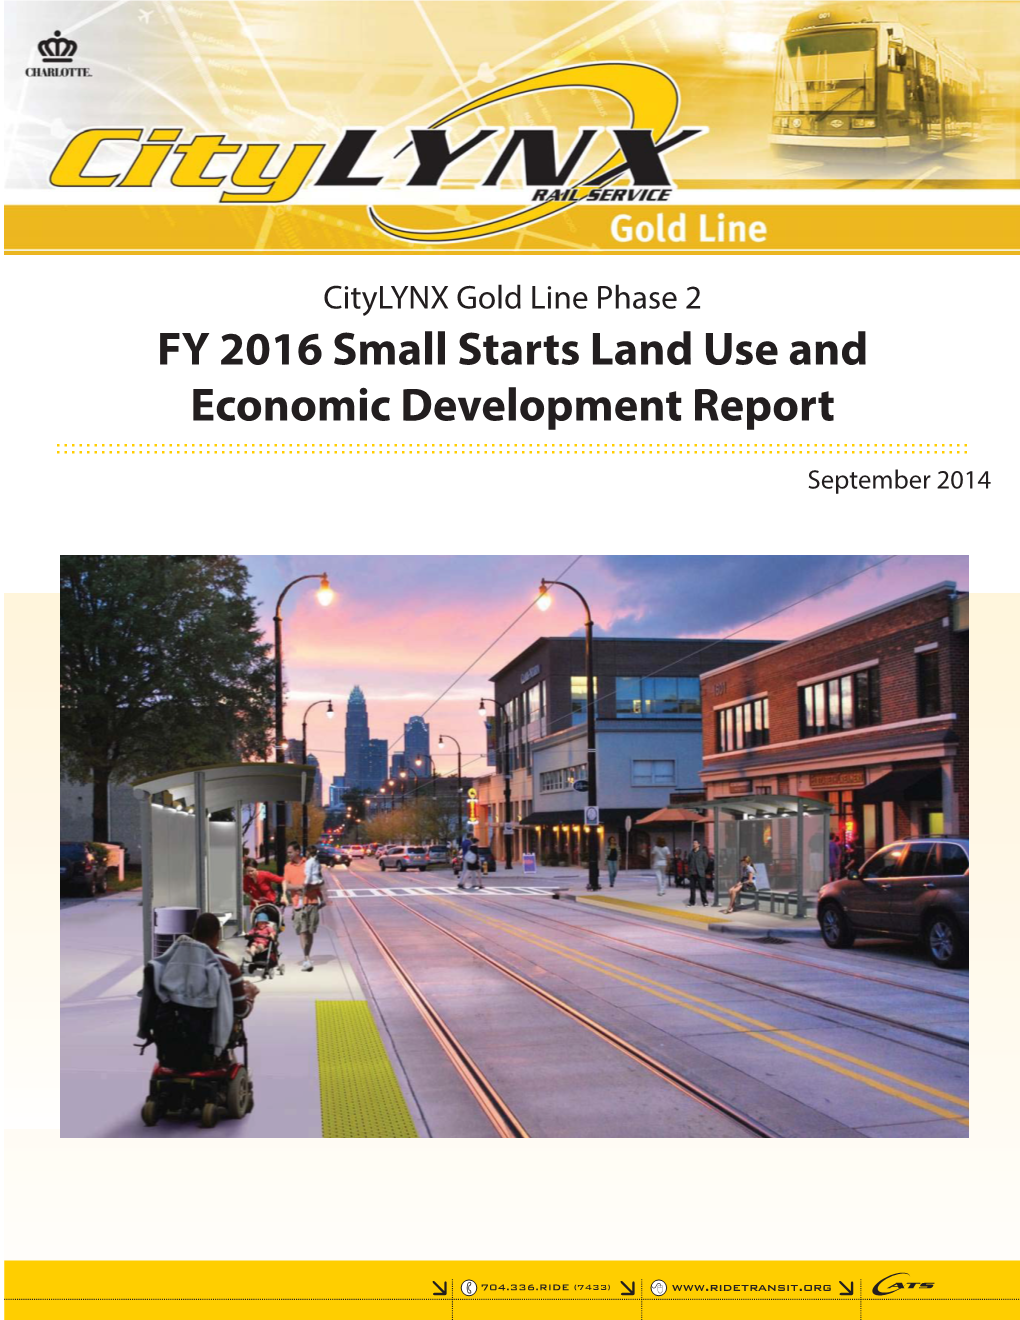 FY 2016 Small Starts Land Use and Economic Development Report